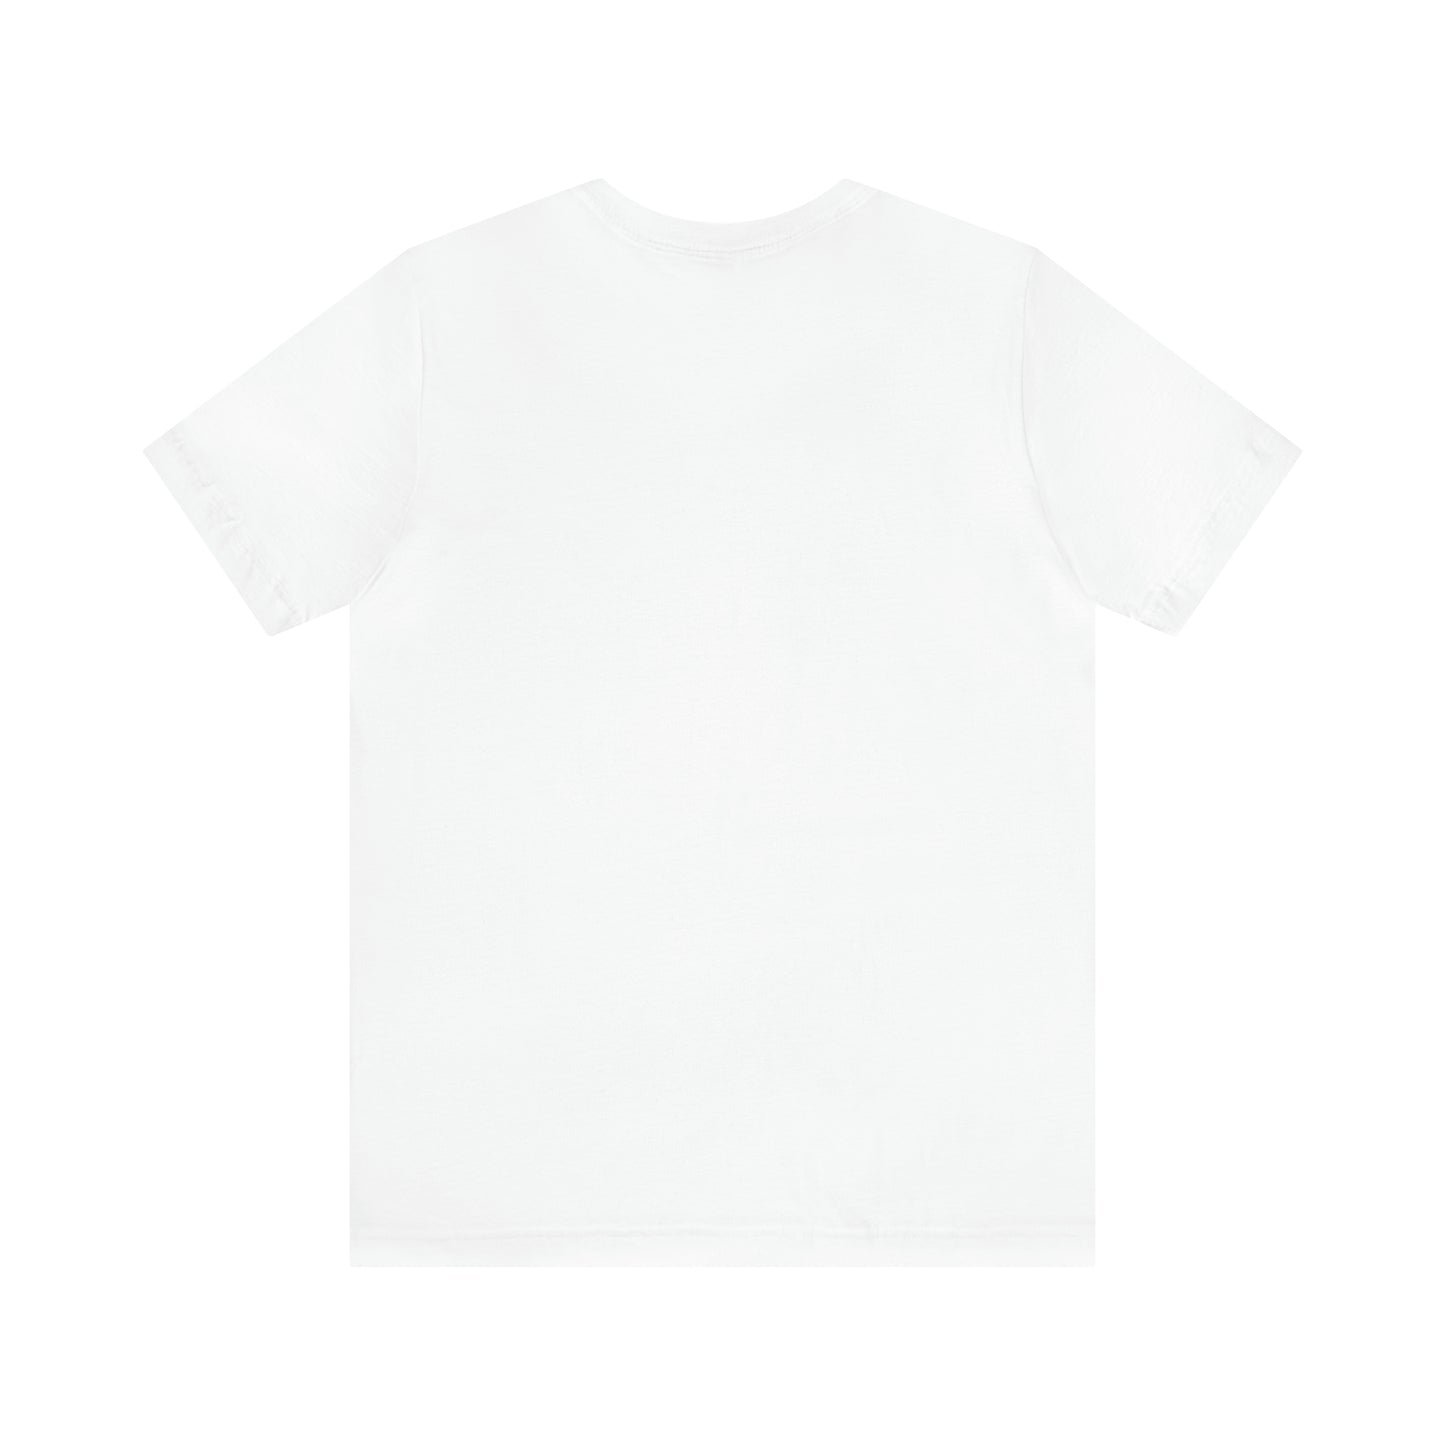 Stiky X Frequency Short Sleeve Tee